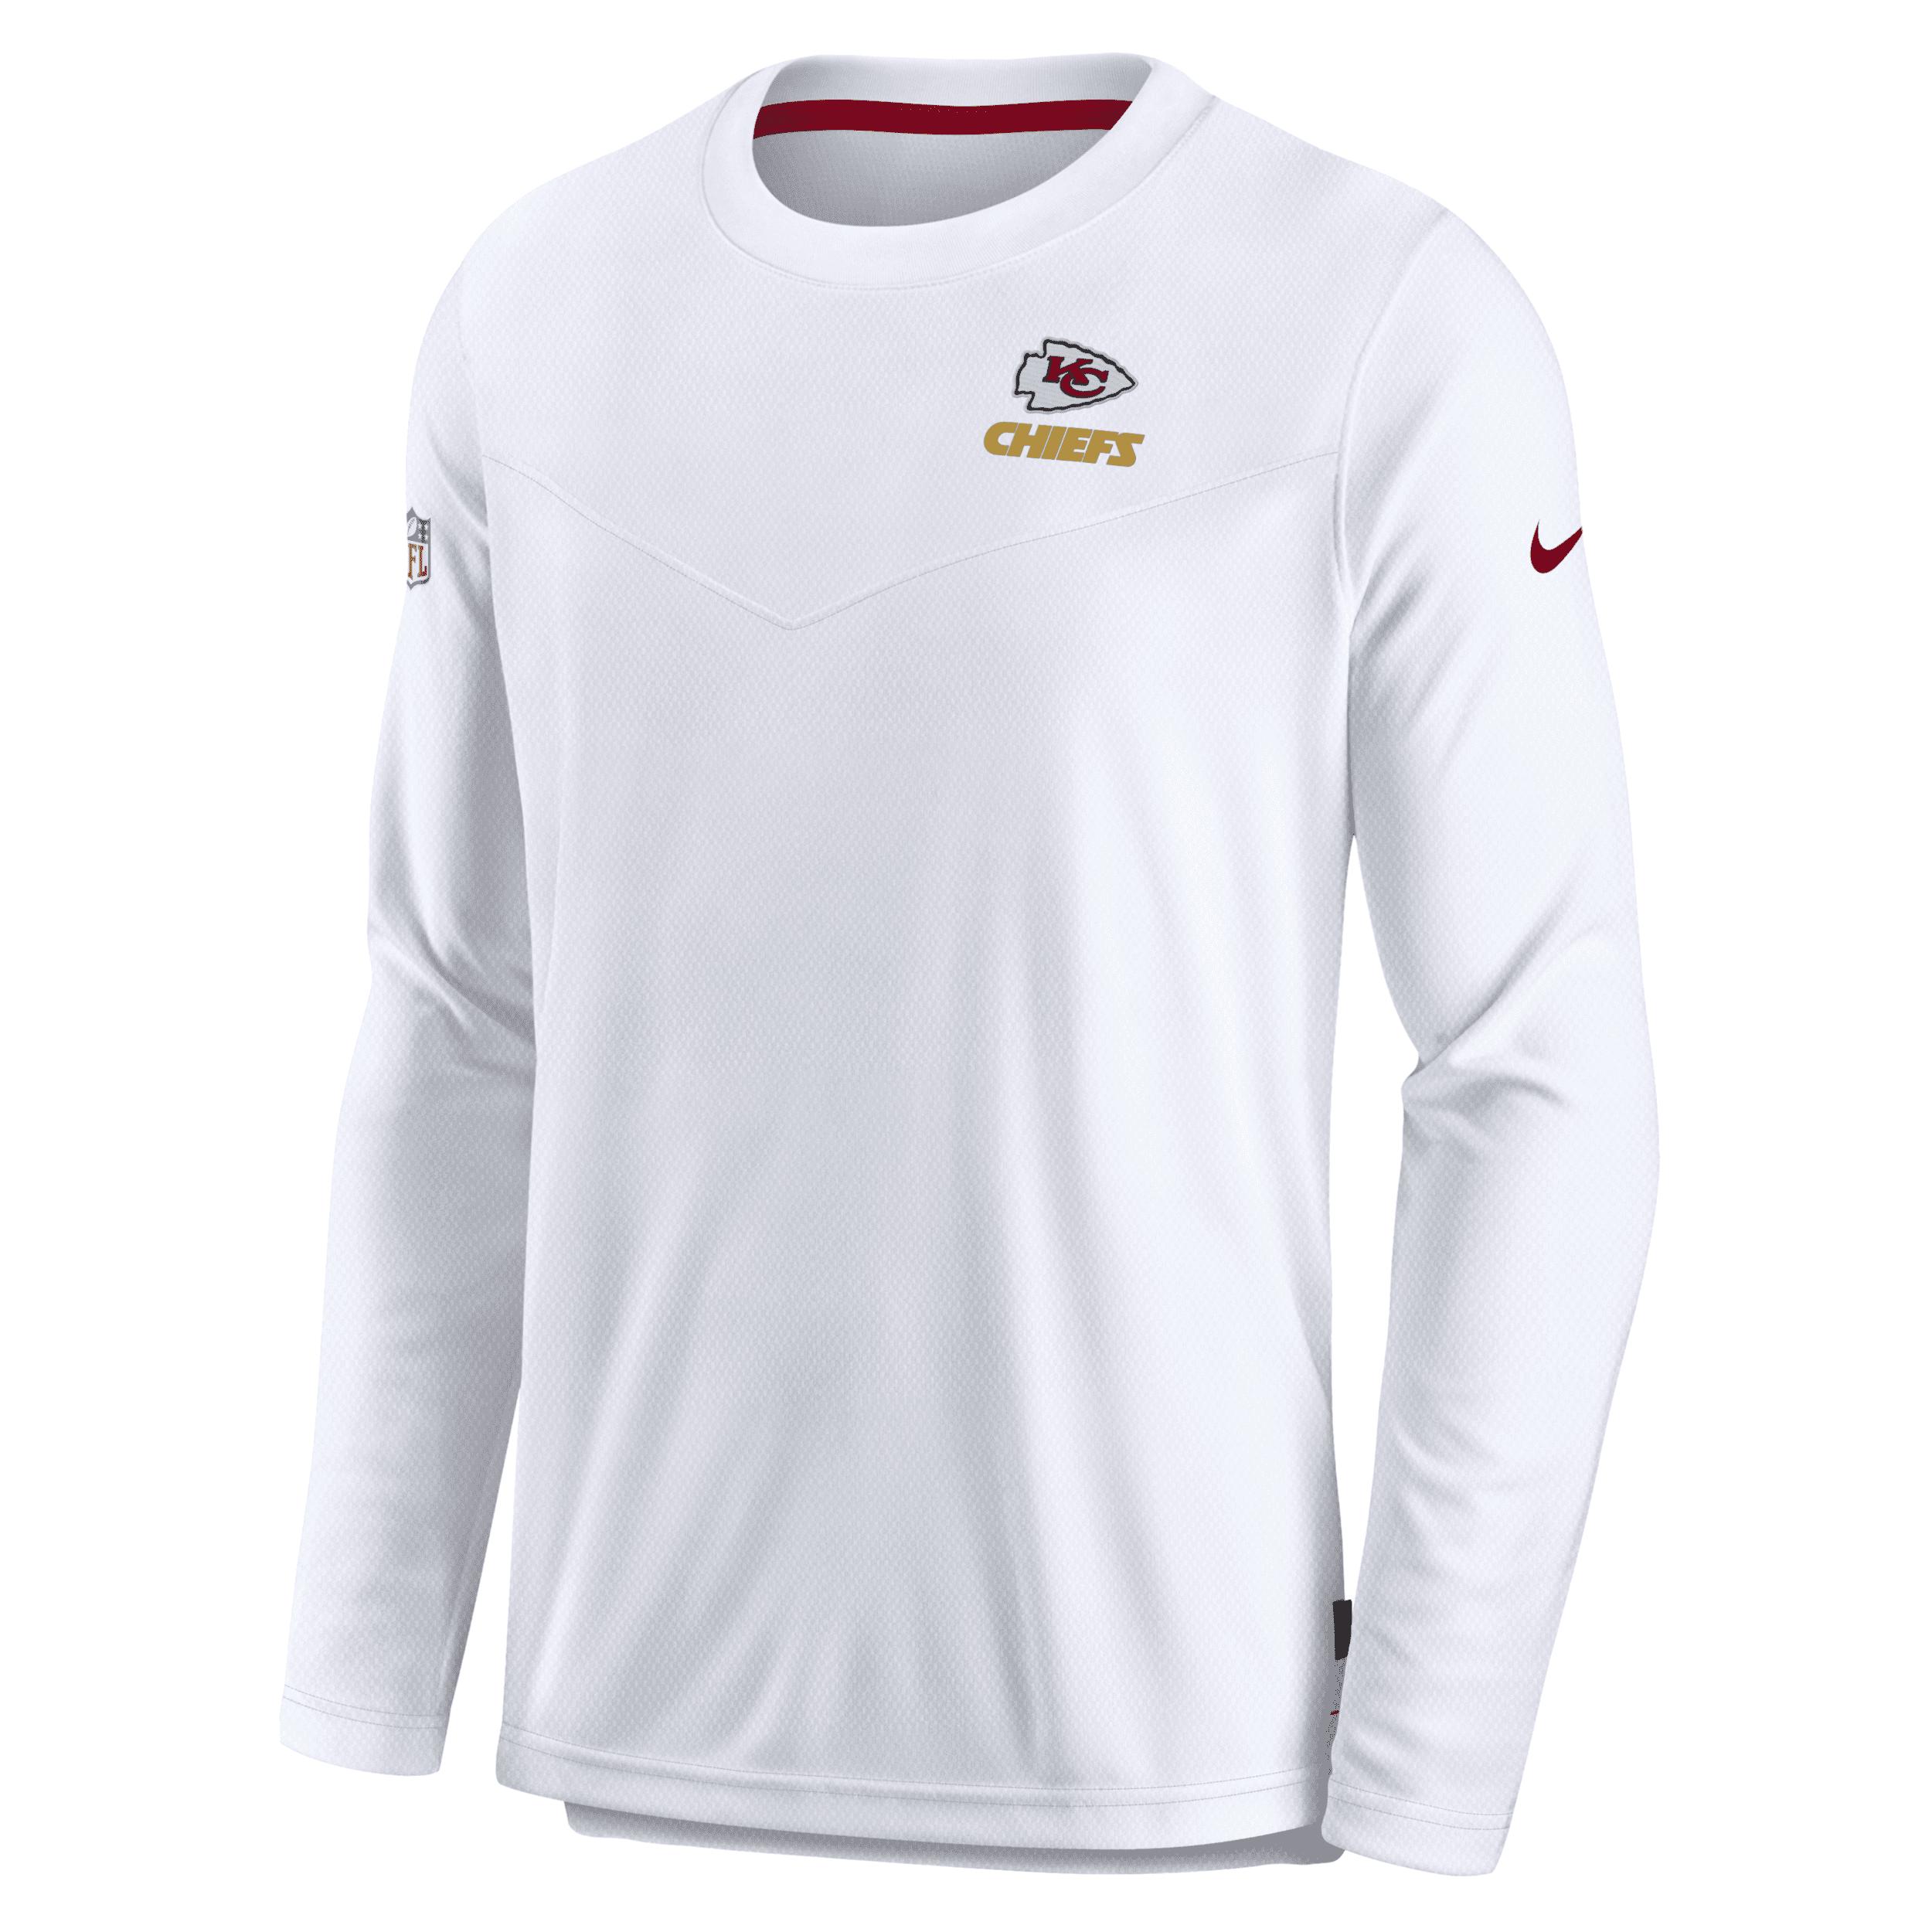 Nike Dri-fit Lockup (nfl Kansas City Chiefs) Long-sleeve Top in White for  Men